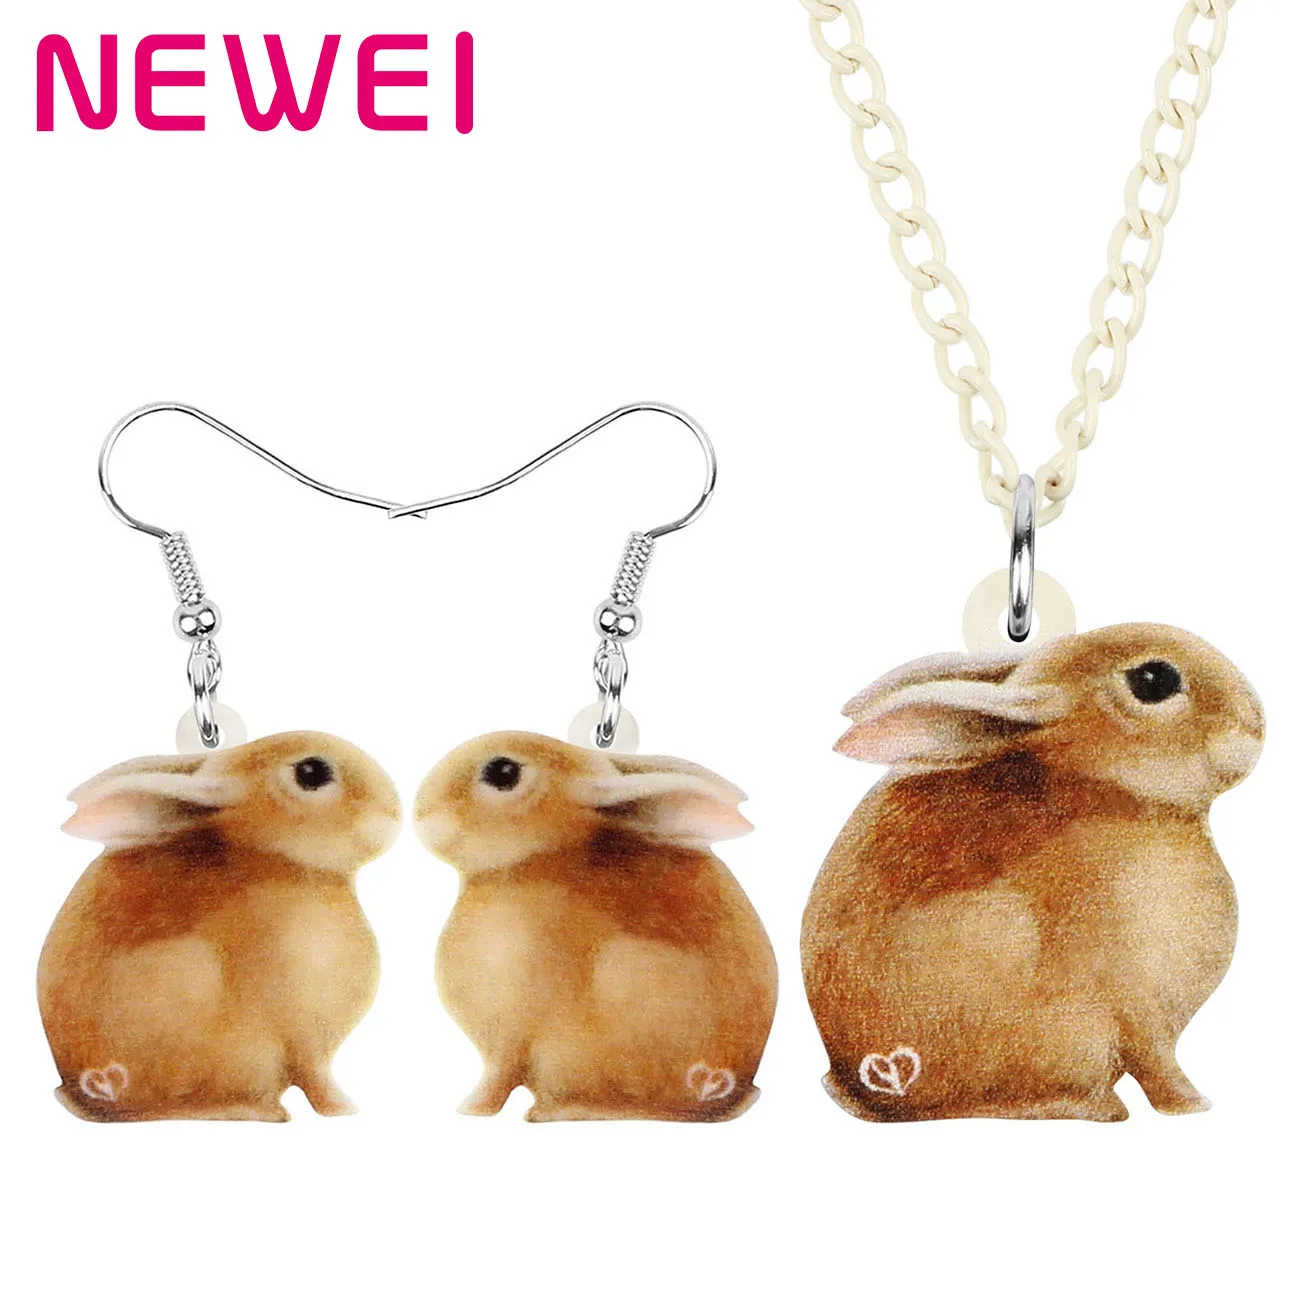 

Newei Acrylic Easter Brown Hare Rabbit Bunny Jewelry Sets Print Cute Pet Animal Earrings Necklace For Women Girls Festival Gift